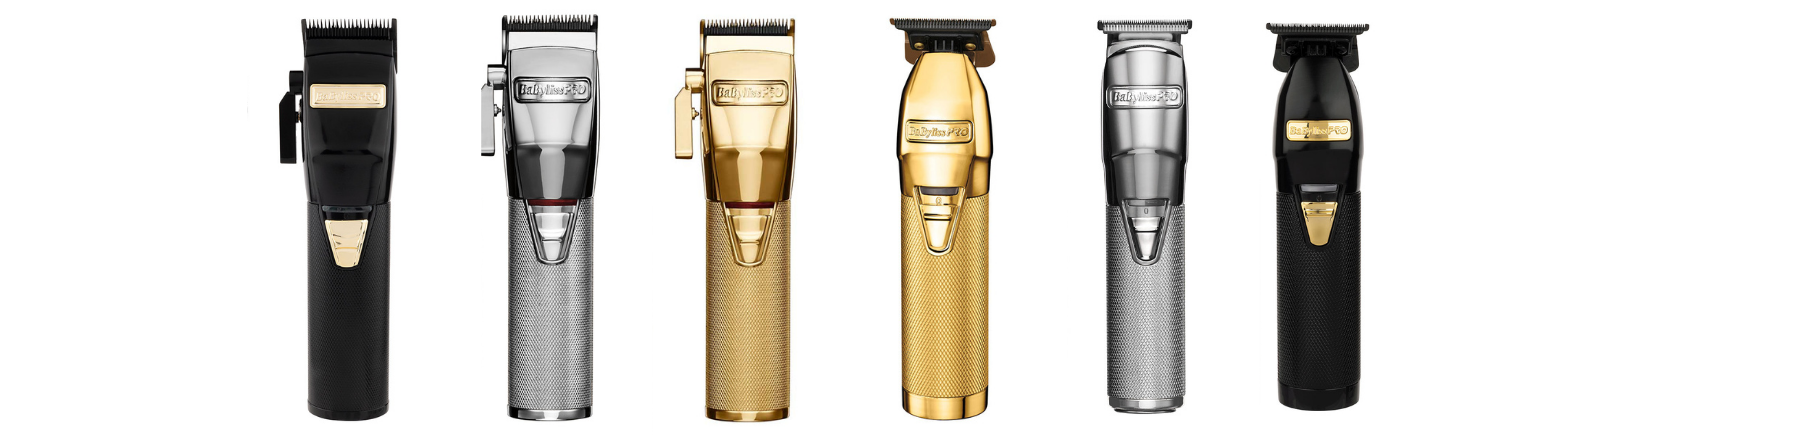 Professional Hair Clippers and Trimmers